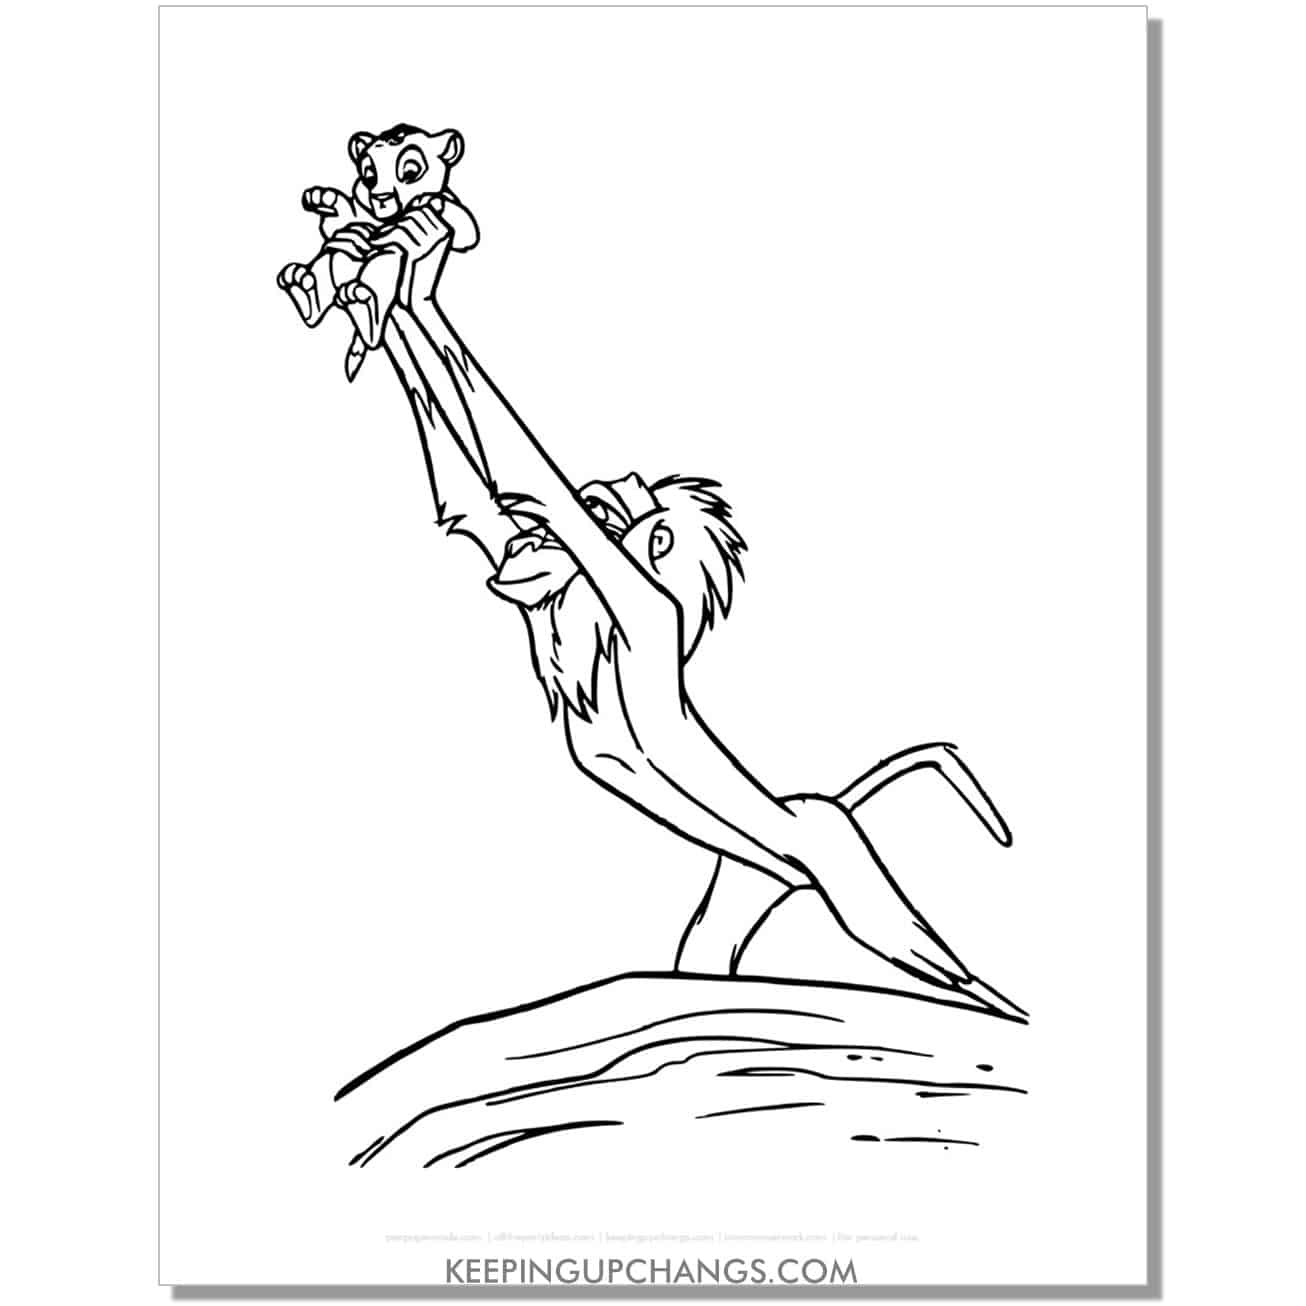 rafiki holds simba up for kingdom to see lion king coloring page, sheet.